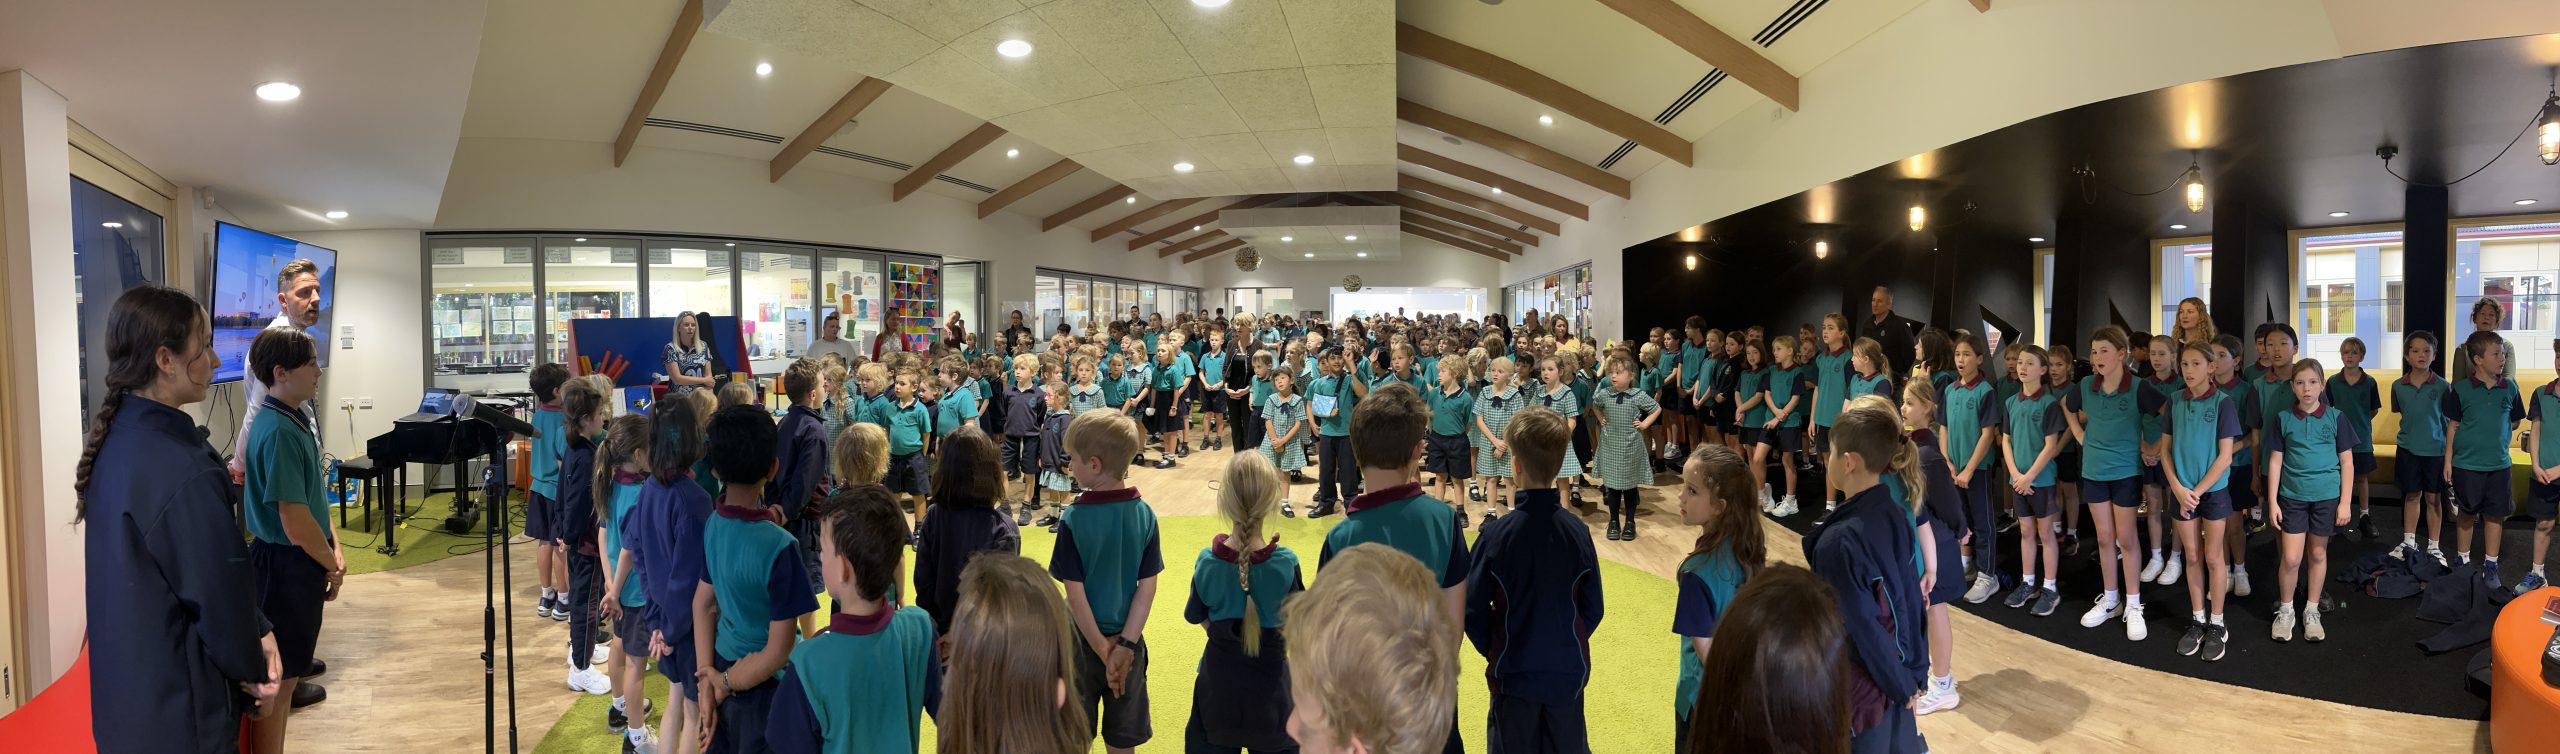 Primary Assembly 02JUN23